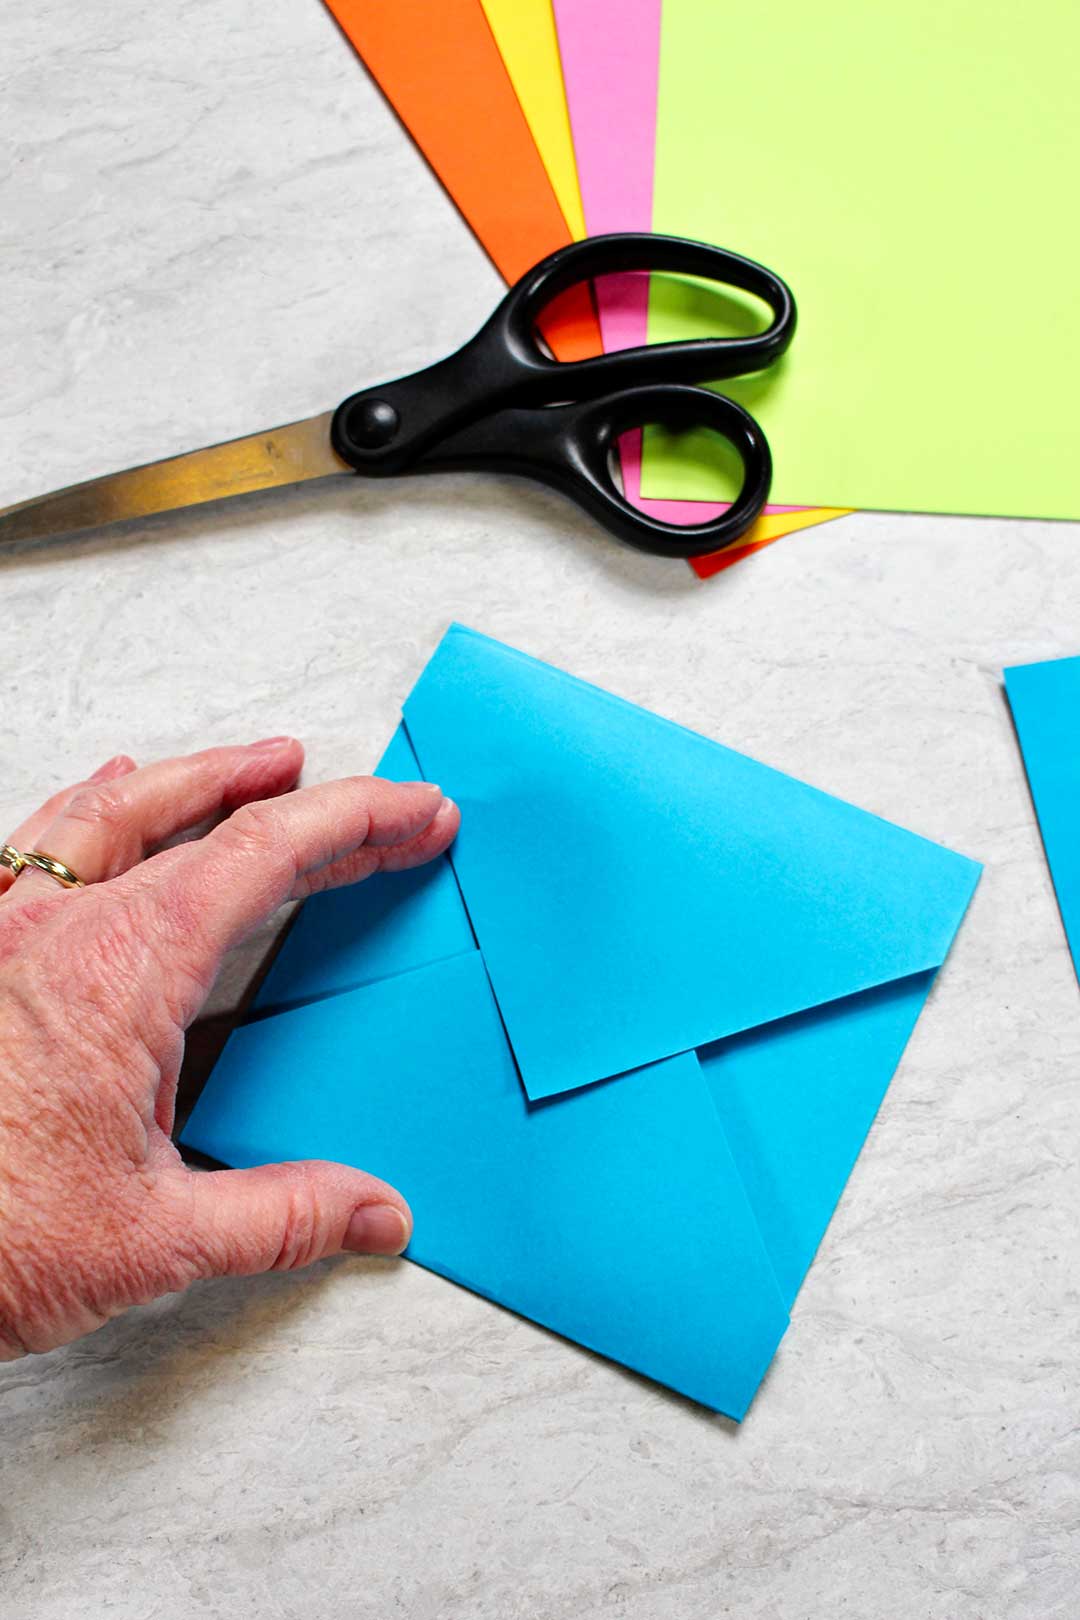 A homemade blue envelope near a pile of colorful paper and a pair of scissors.